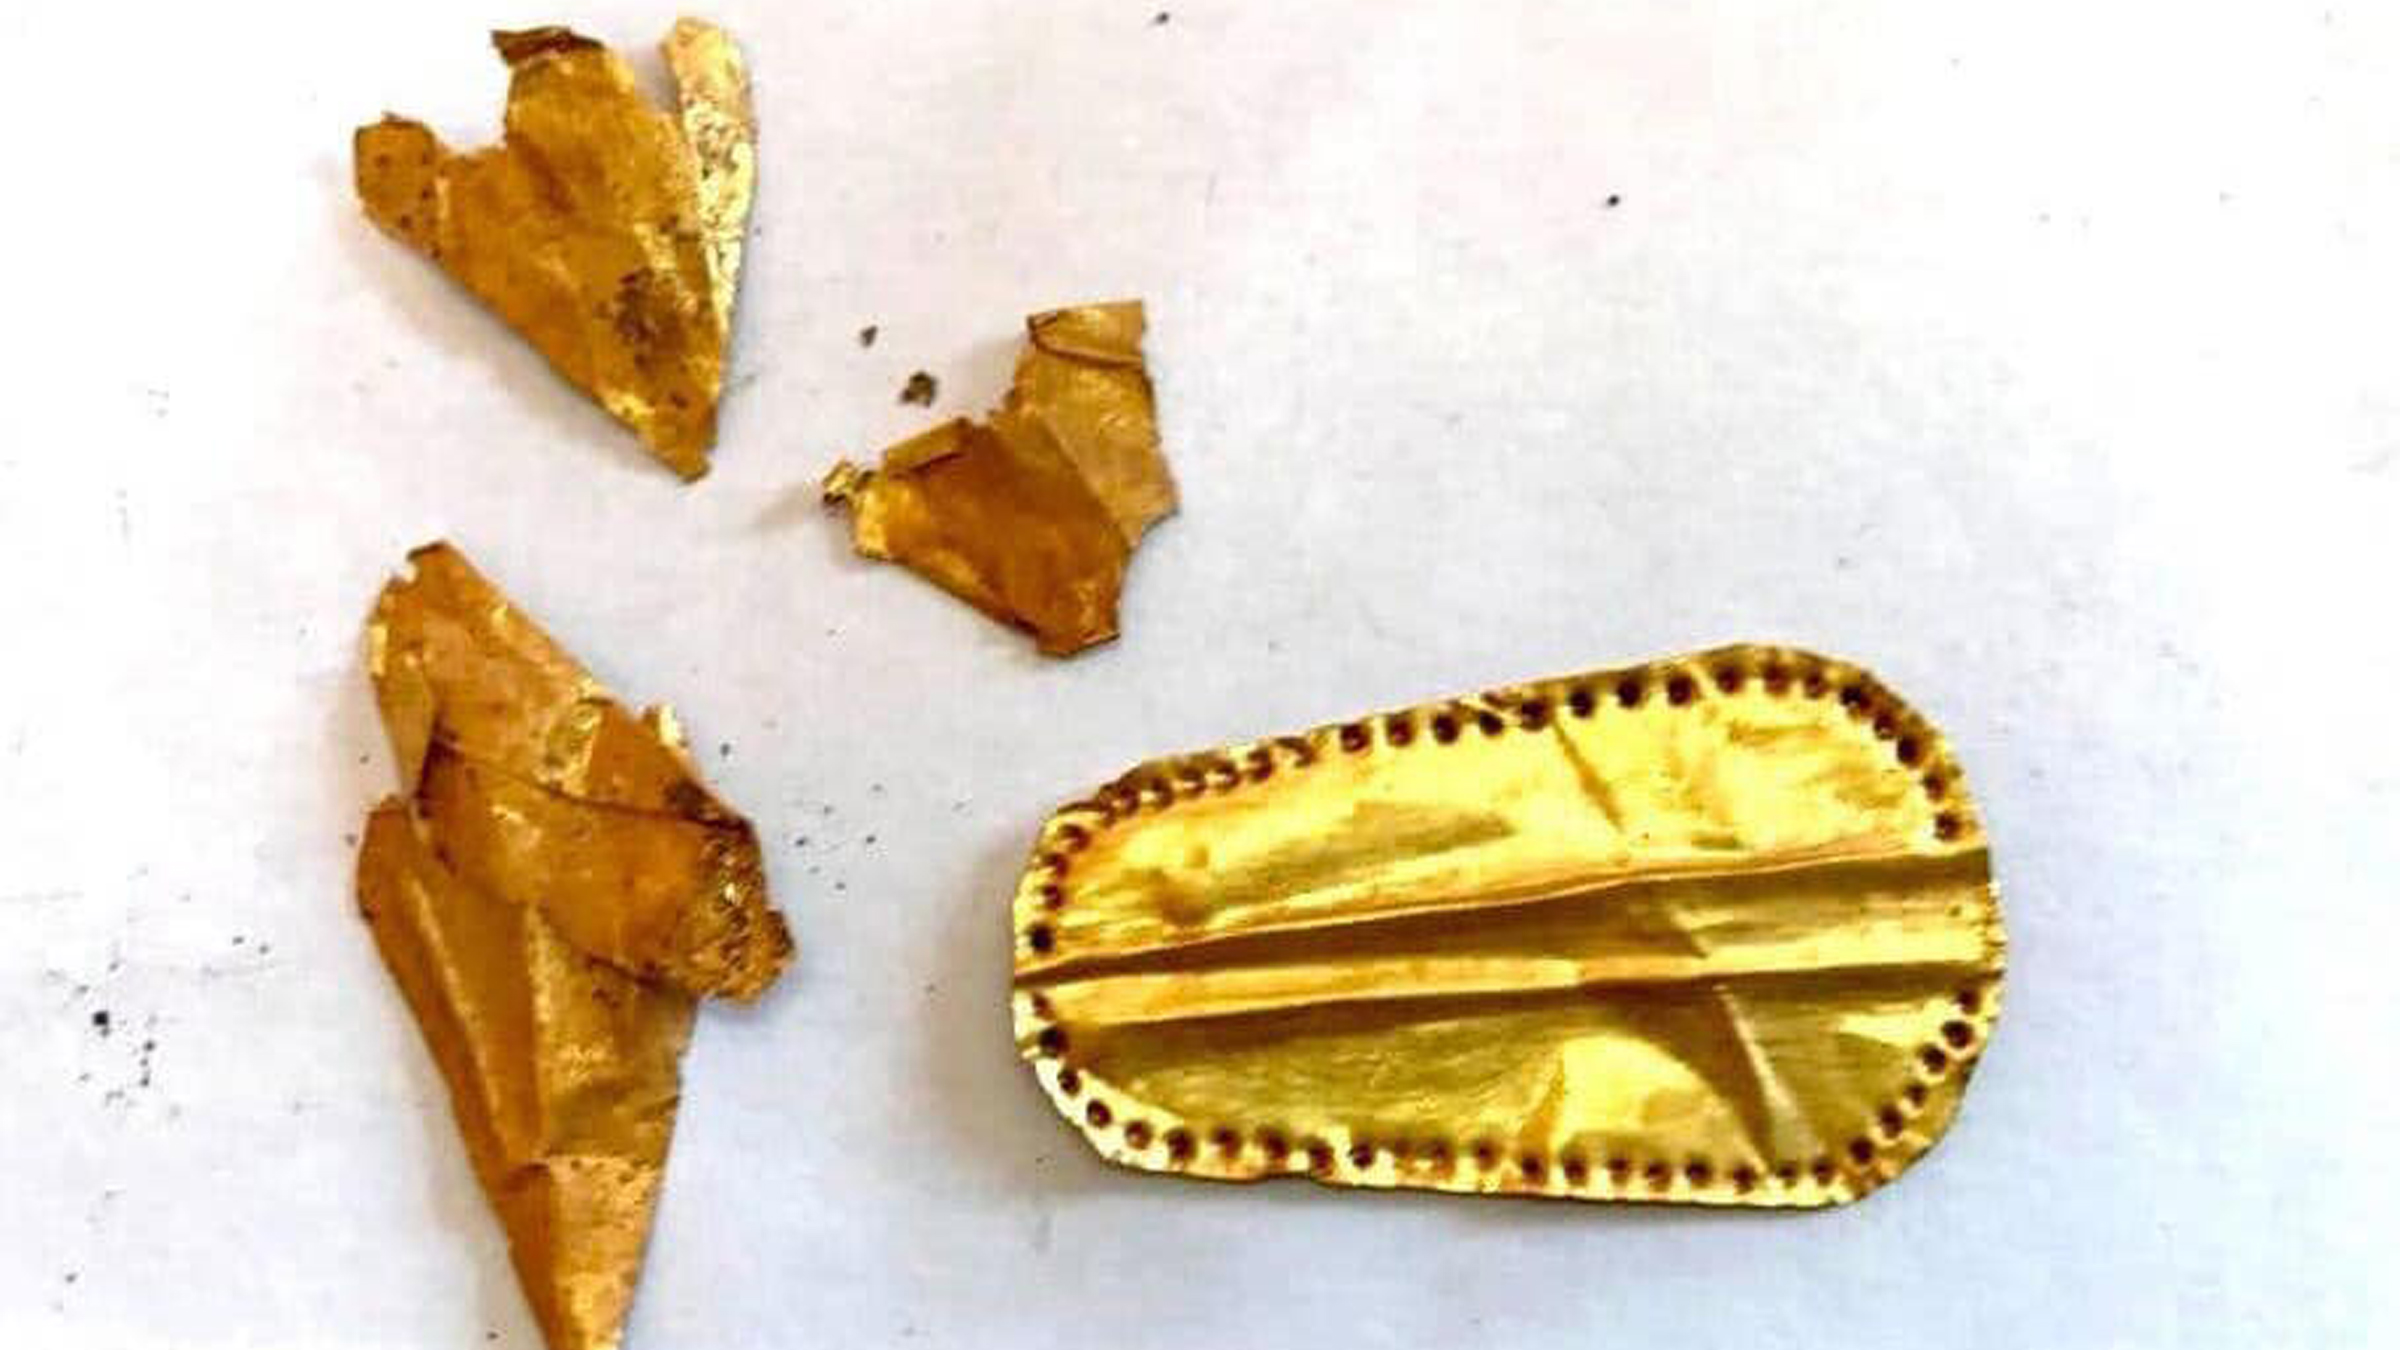 The remains of a gold tongue found on a mummy from ancient Egypt.